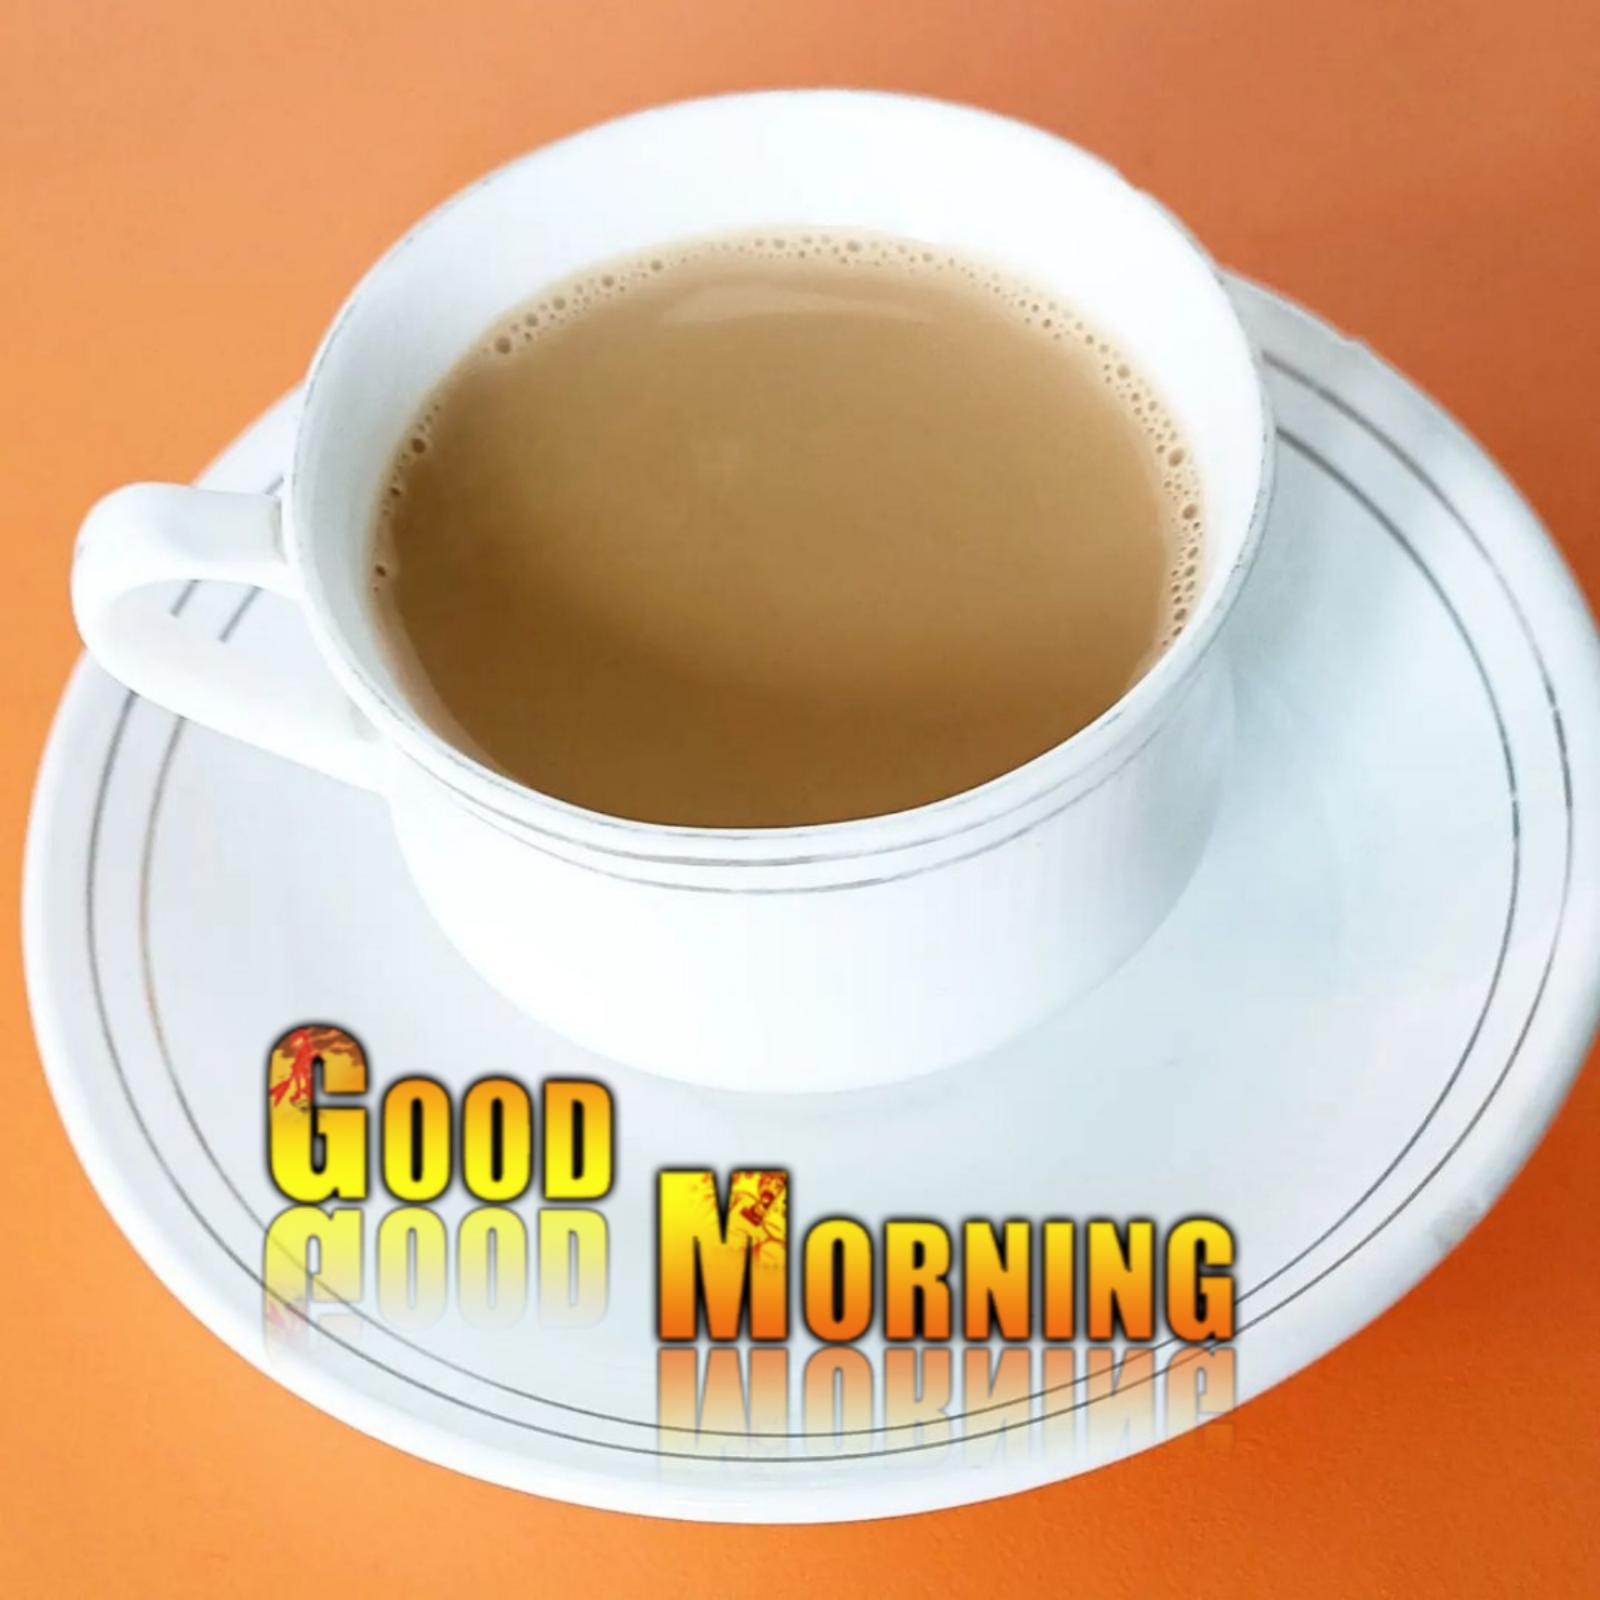 Good Morning Cup Of Tea Images